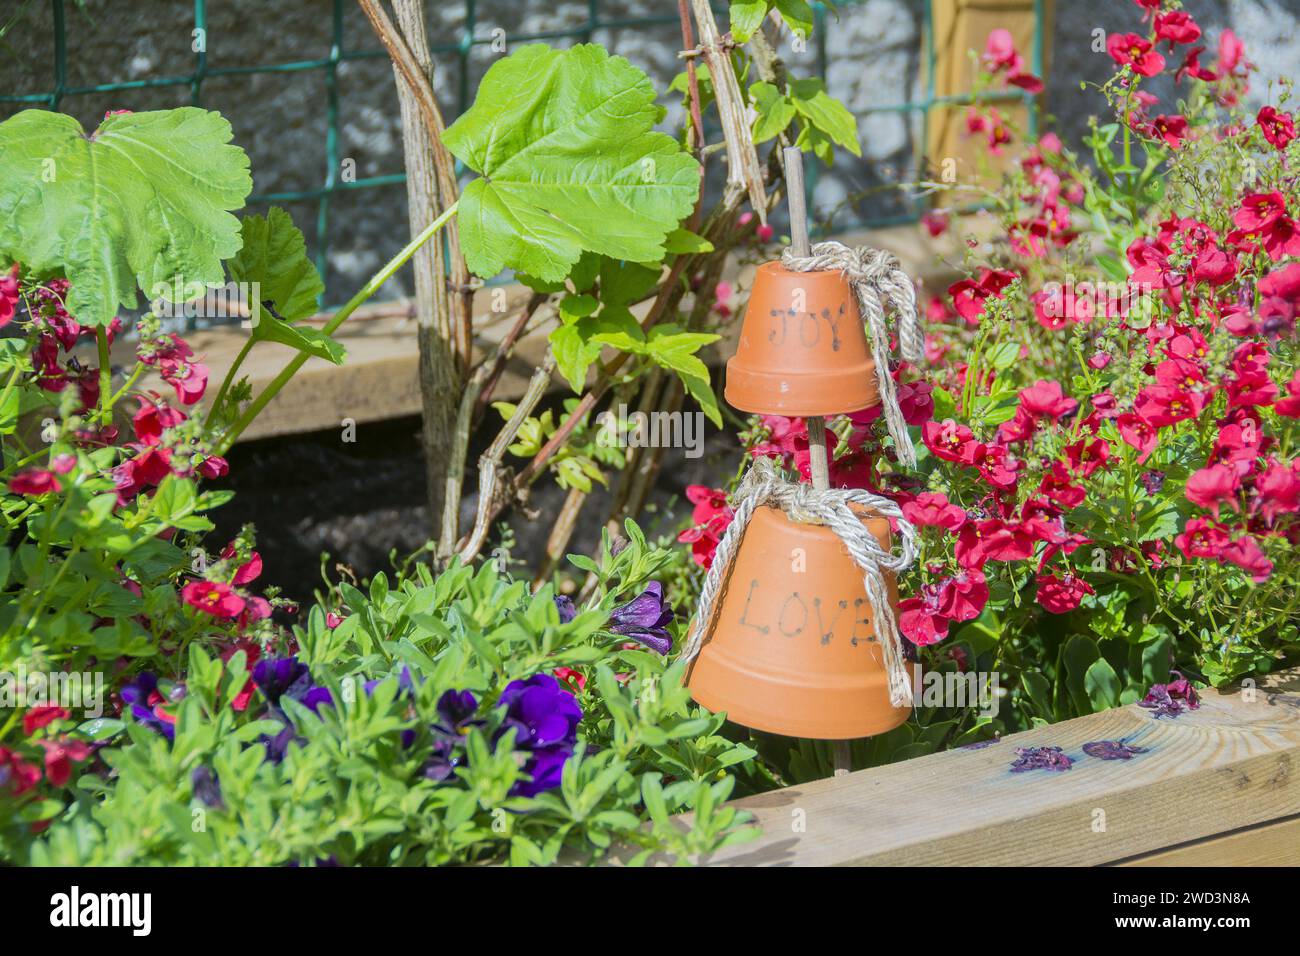 Window box with flowers including Twinspur. Flower pot with Joy and Love hanging on string. Stock Photo